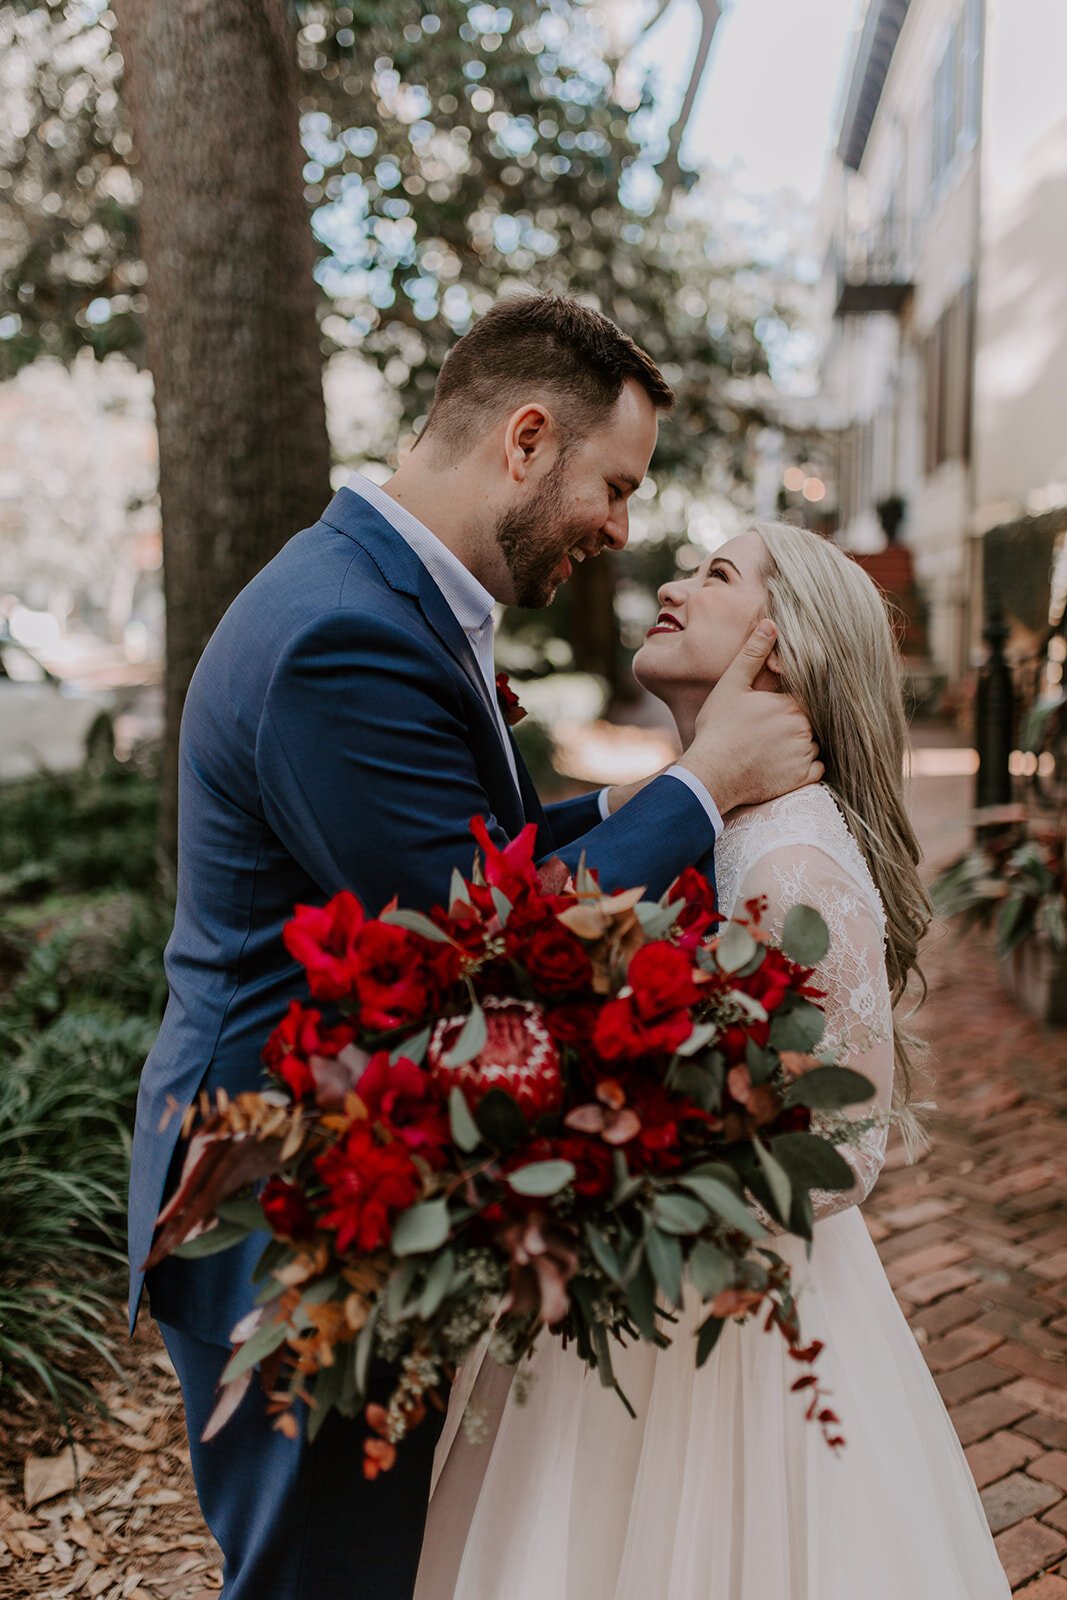 ivory-and-beau-florals-aimee-and-austin-wedding-blog-wedding-florals-savannah-florist-wedding-florals-floral-design-savannah-wedding-rooftop-wedding-katie-mick-photography-perry-lane-hotel-2T8A8384.jpg